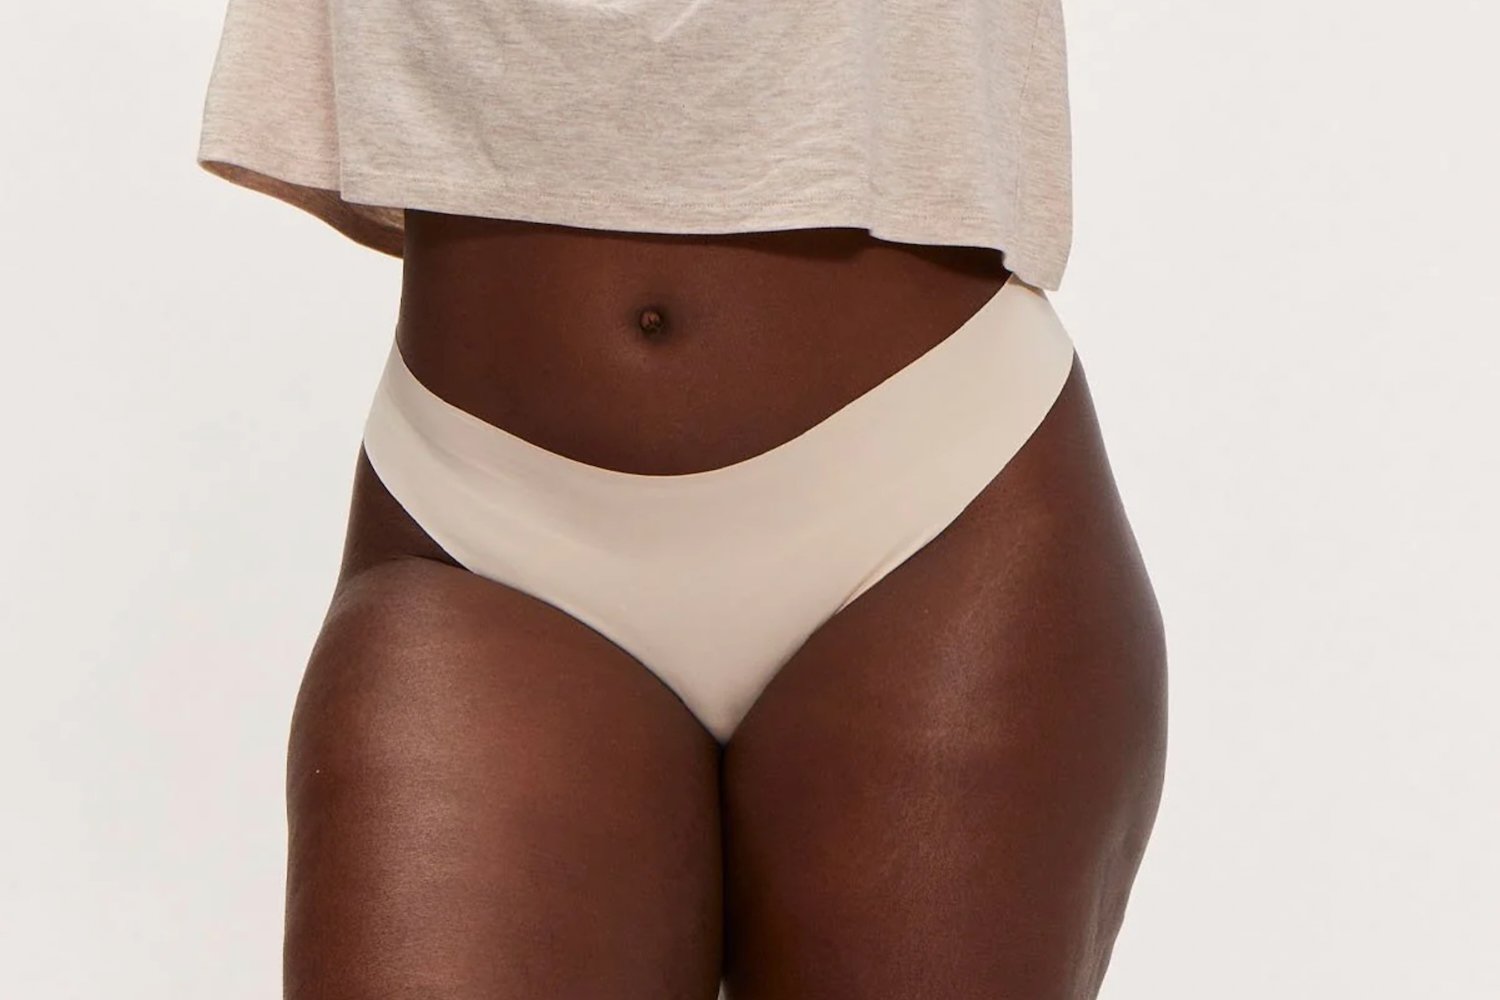 High-rise women's underwear: 5 situations where you seriously need